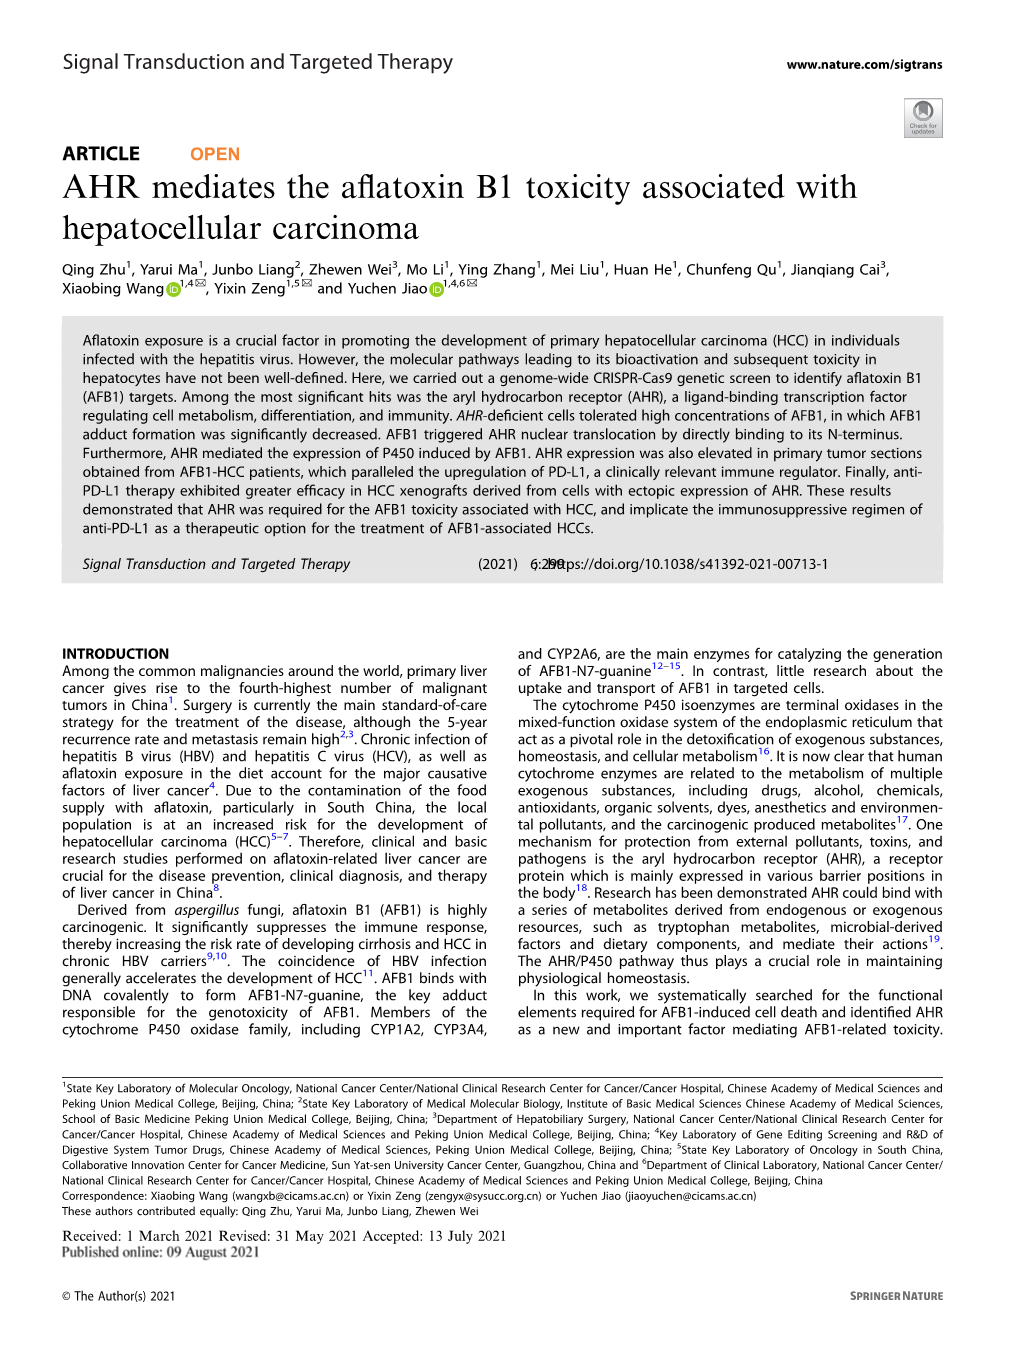 AHR Mediates the Aflatoxin B1 Toxicity Associated with Hepatocellular